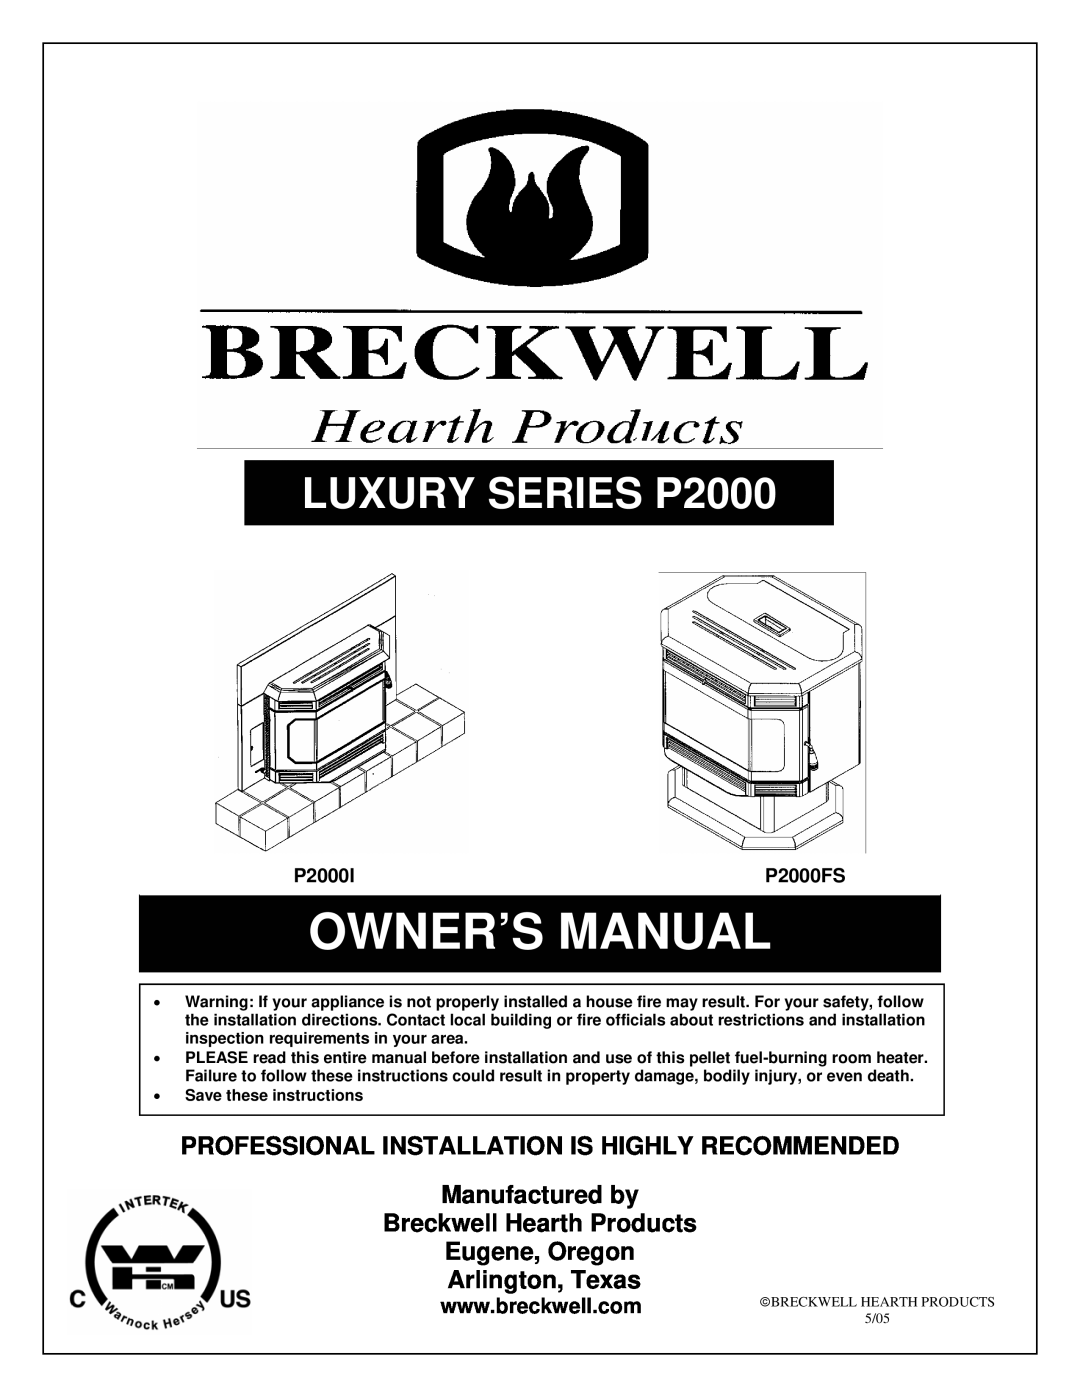 Breckwell P2000I owner manual Professional Installation Is Highly Recommended, Manufactured by, Grand Prairie, Texas 